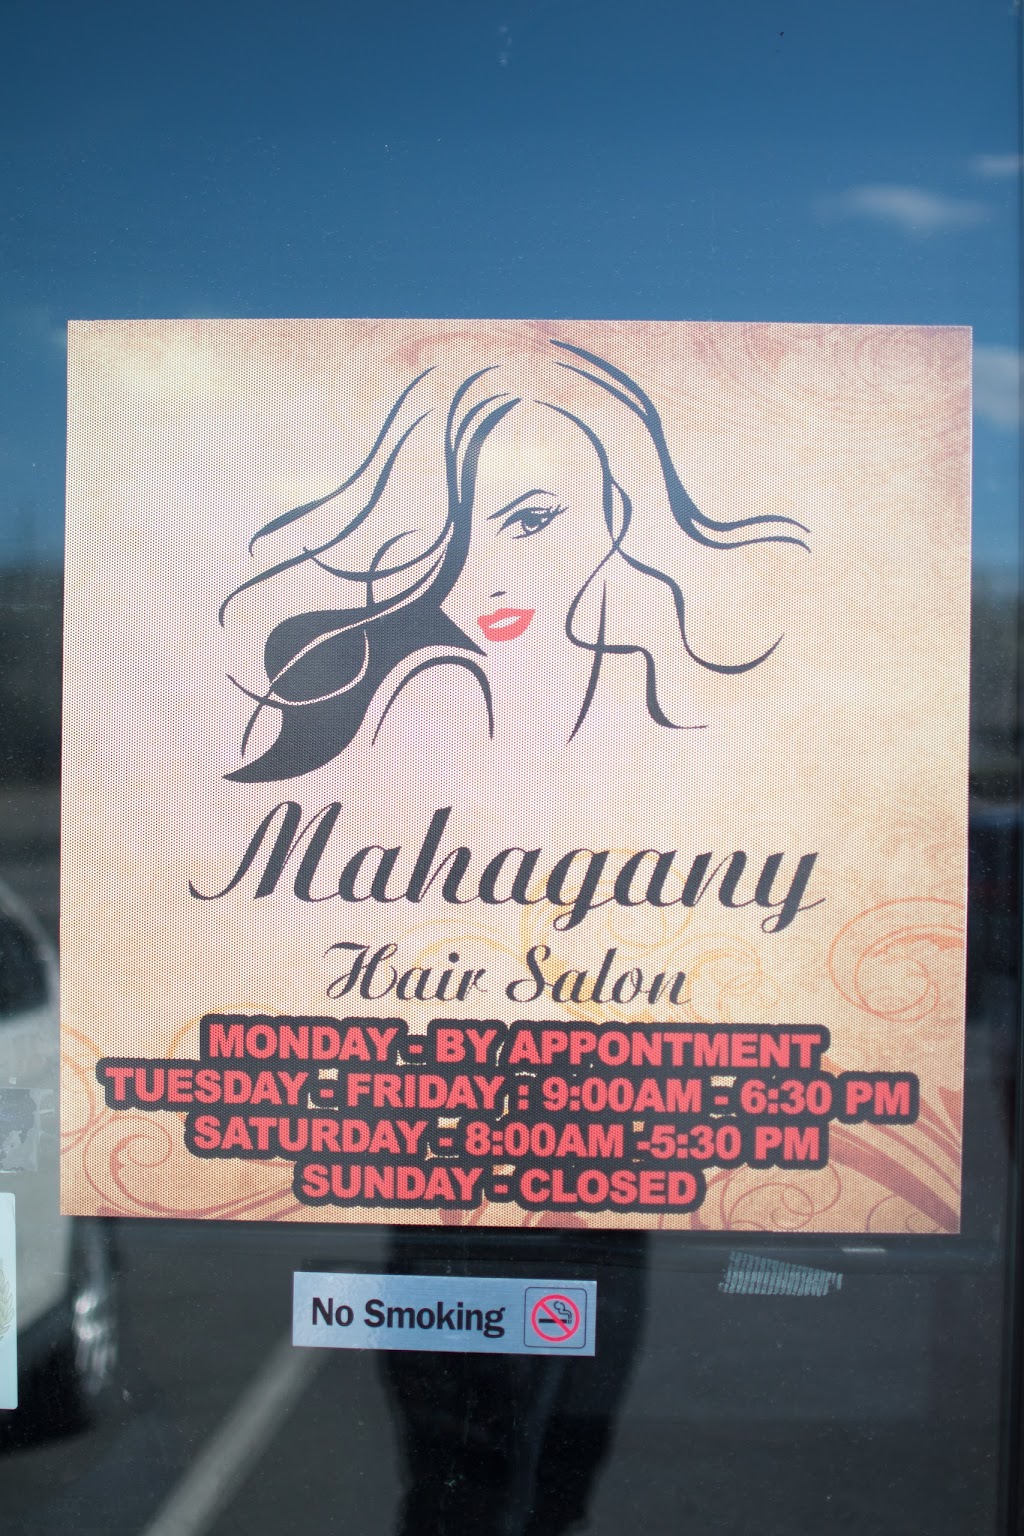 Mahagany Hair Salon: Dominican Stylist | 106 Columbia Dr Suite 5, East Stroudsburg, PA 18301 | Phone: (570) 872-9101